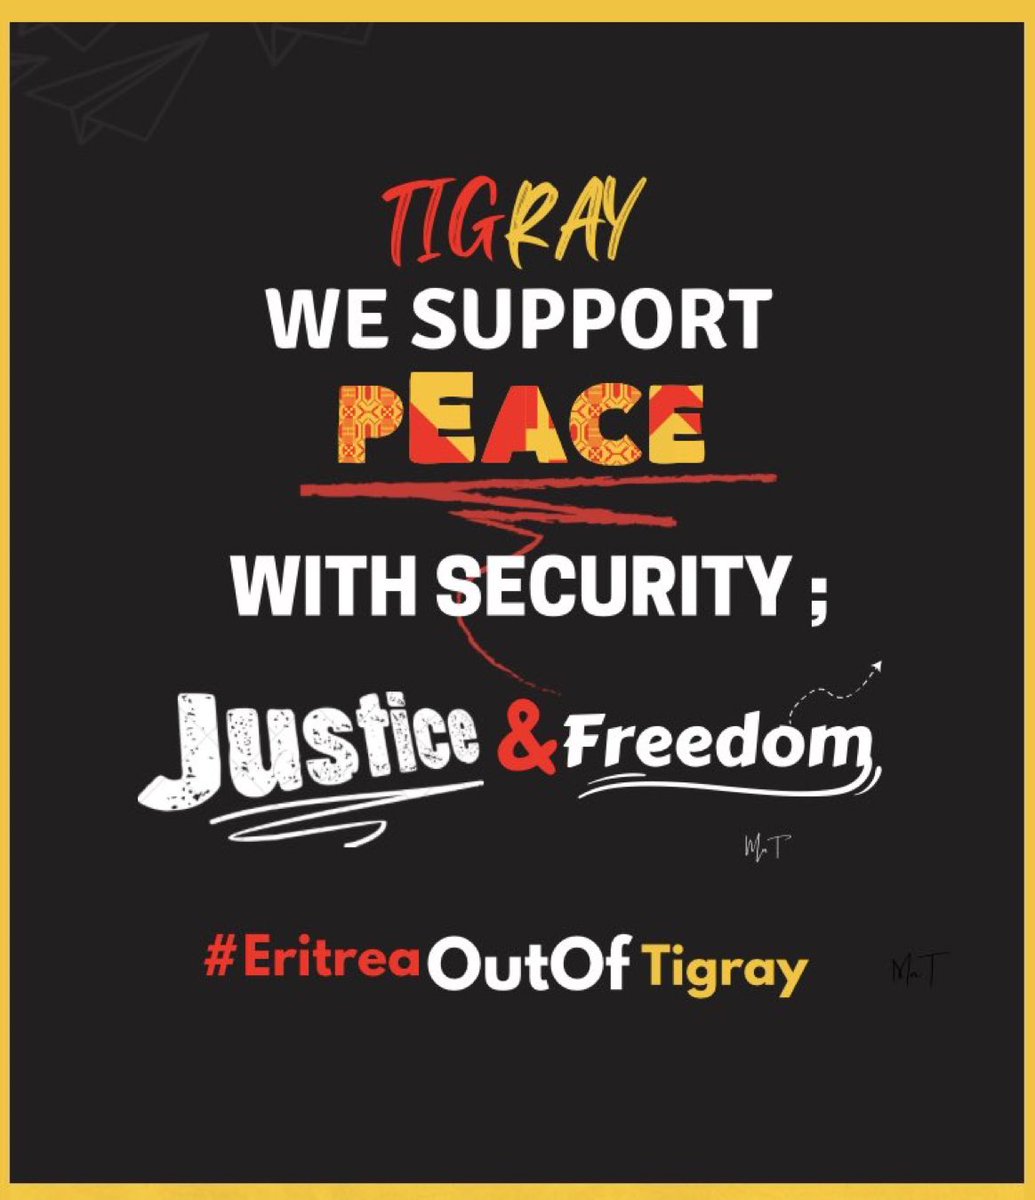 Over +130K Rape victims are seeking to action to #Justice & Millions are seeking z withdraw Eritrea from Tigray. The atrocities & sexual violence can no longer be ignored in #Tigray. We demand action & accountability now. #EritreaOutOfTigray @POTUS @UN @SecBlinken 
@hiwan_gal